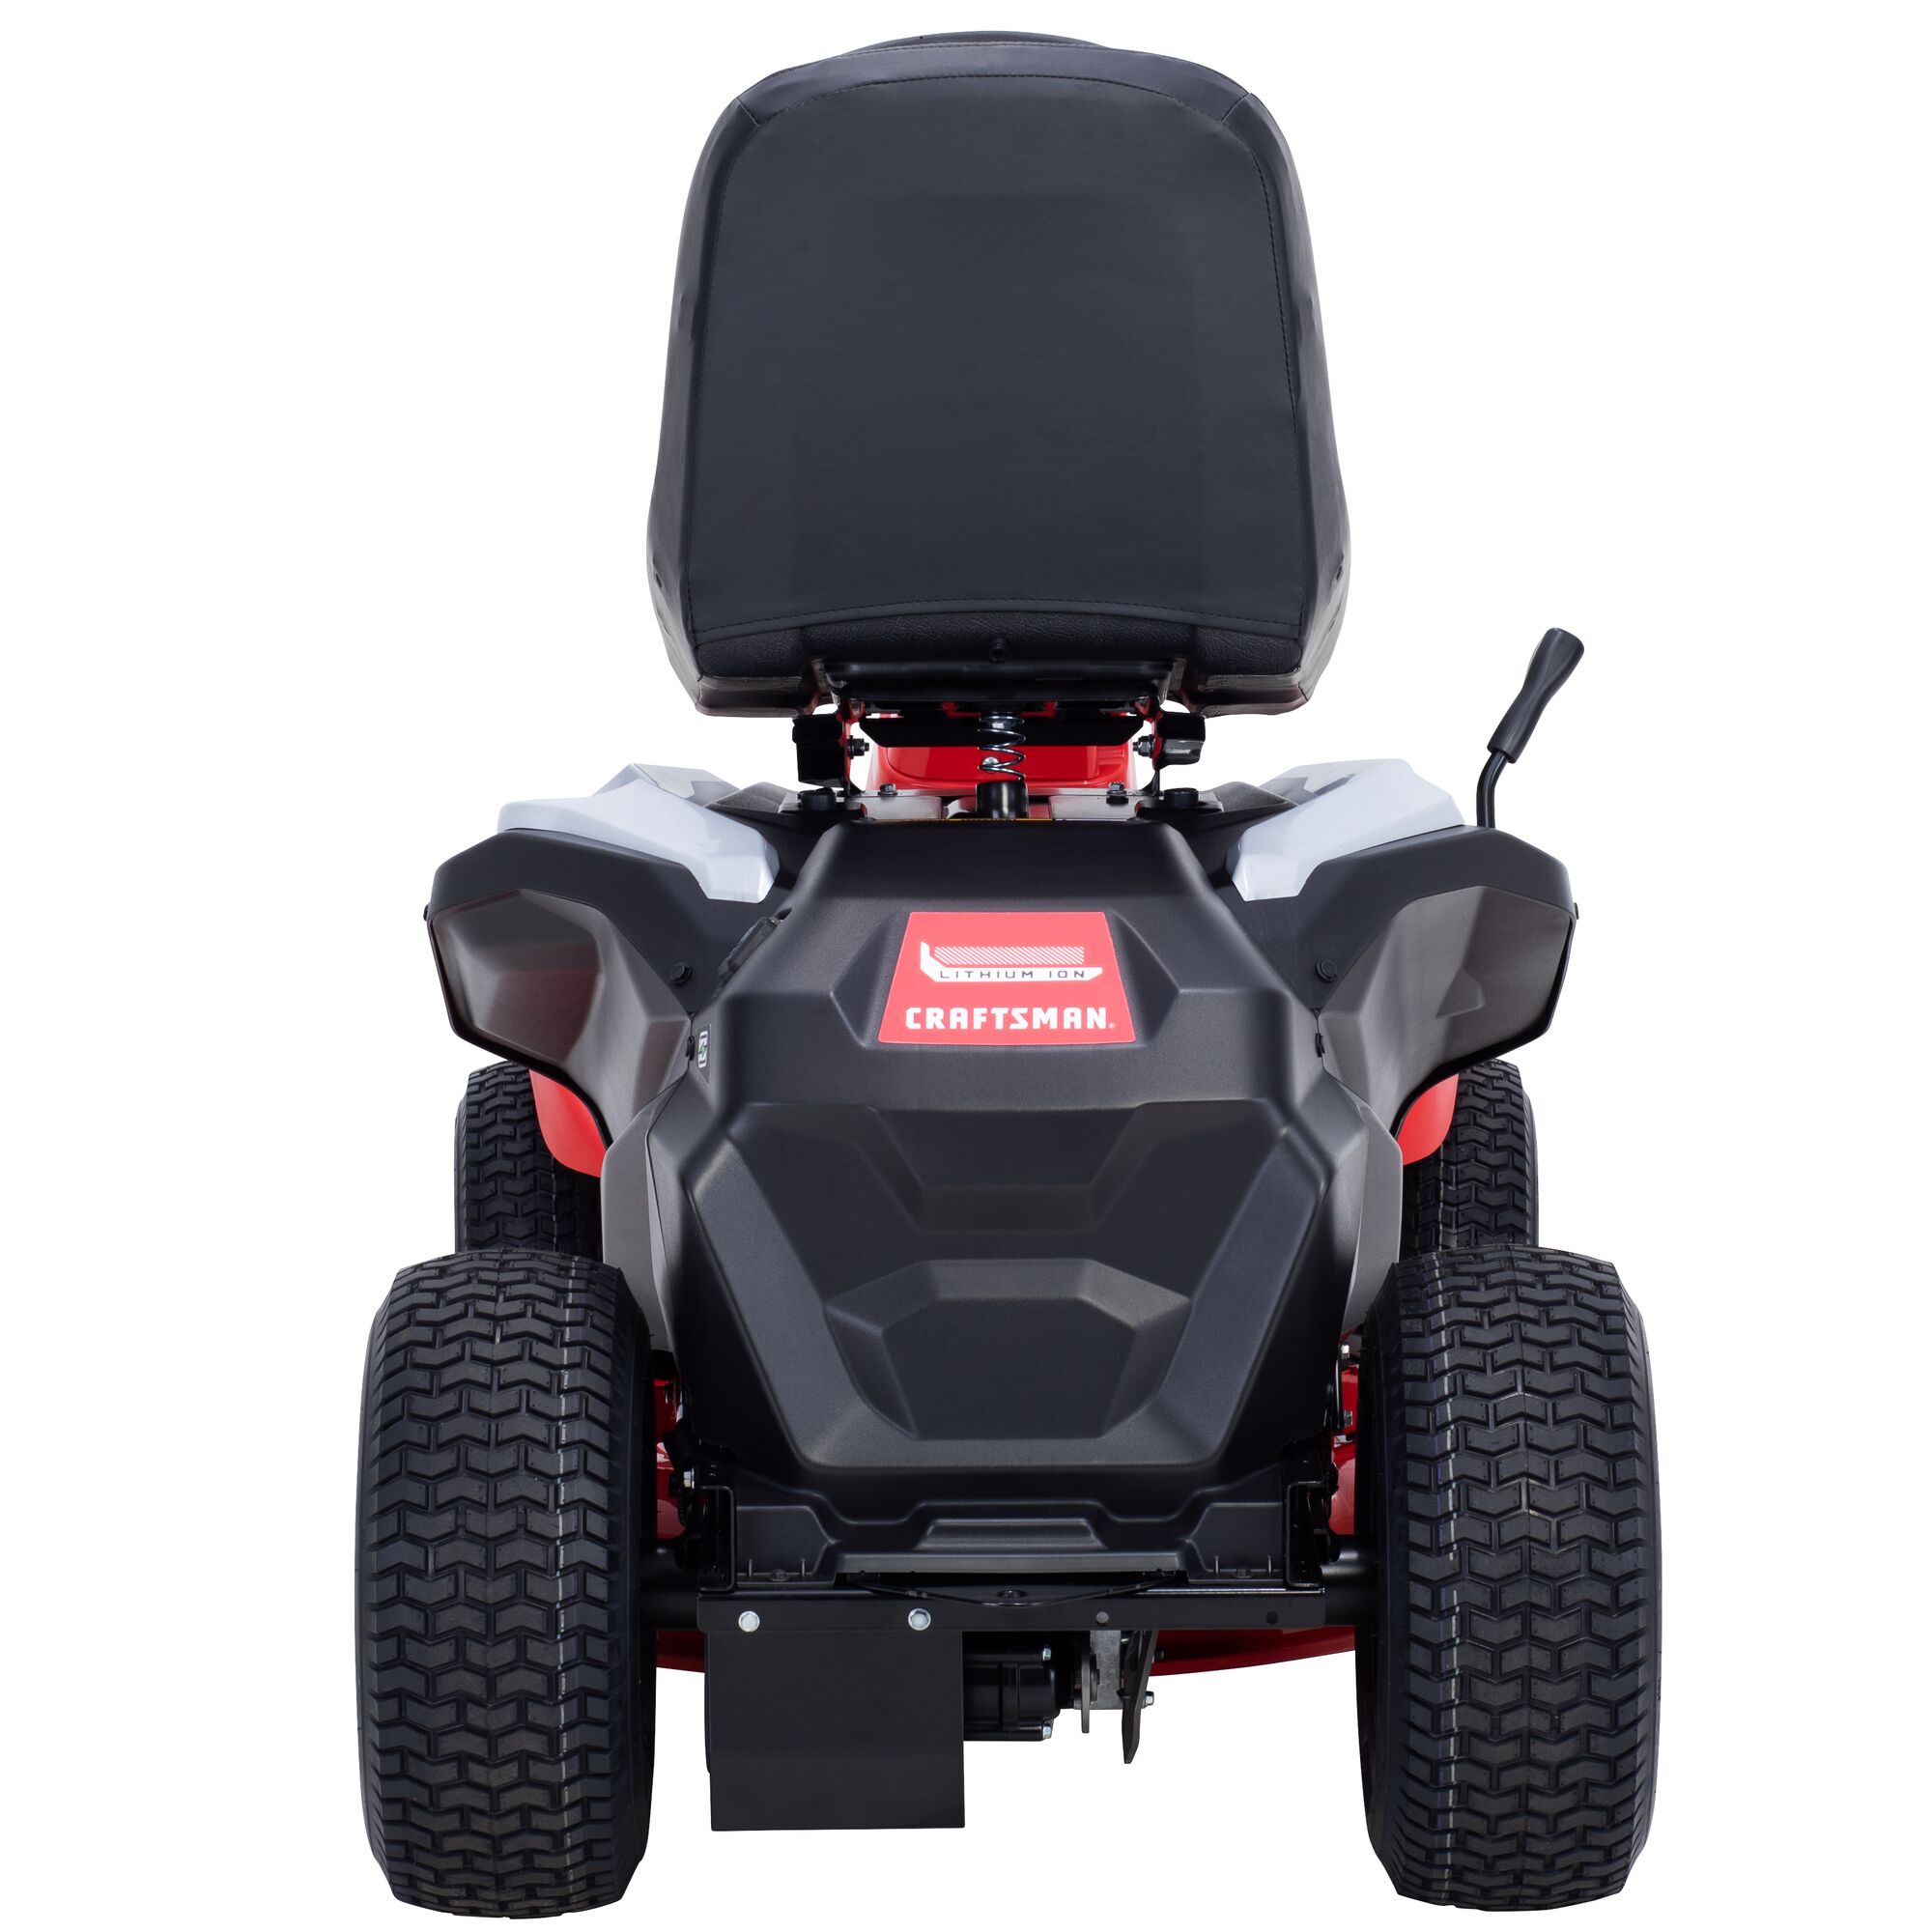 CRAFTSMAN  56V battery-powered compact riding mower